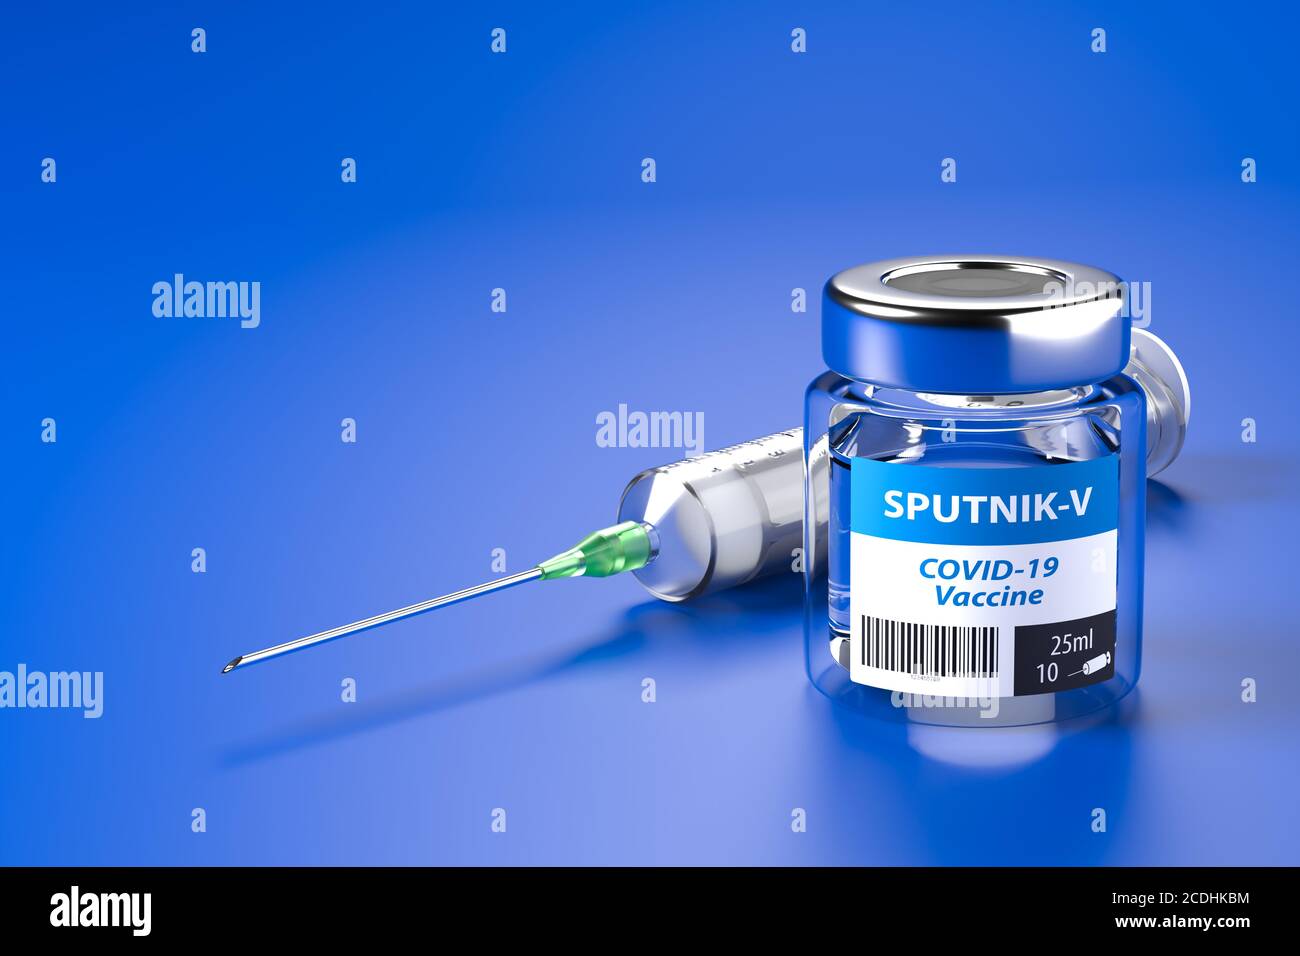 Sputnik V vaccination against COVID-19: A glass container with 10 doses of vaccination and a syringe behind it. Copy space. Stock Photo